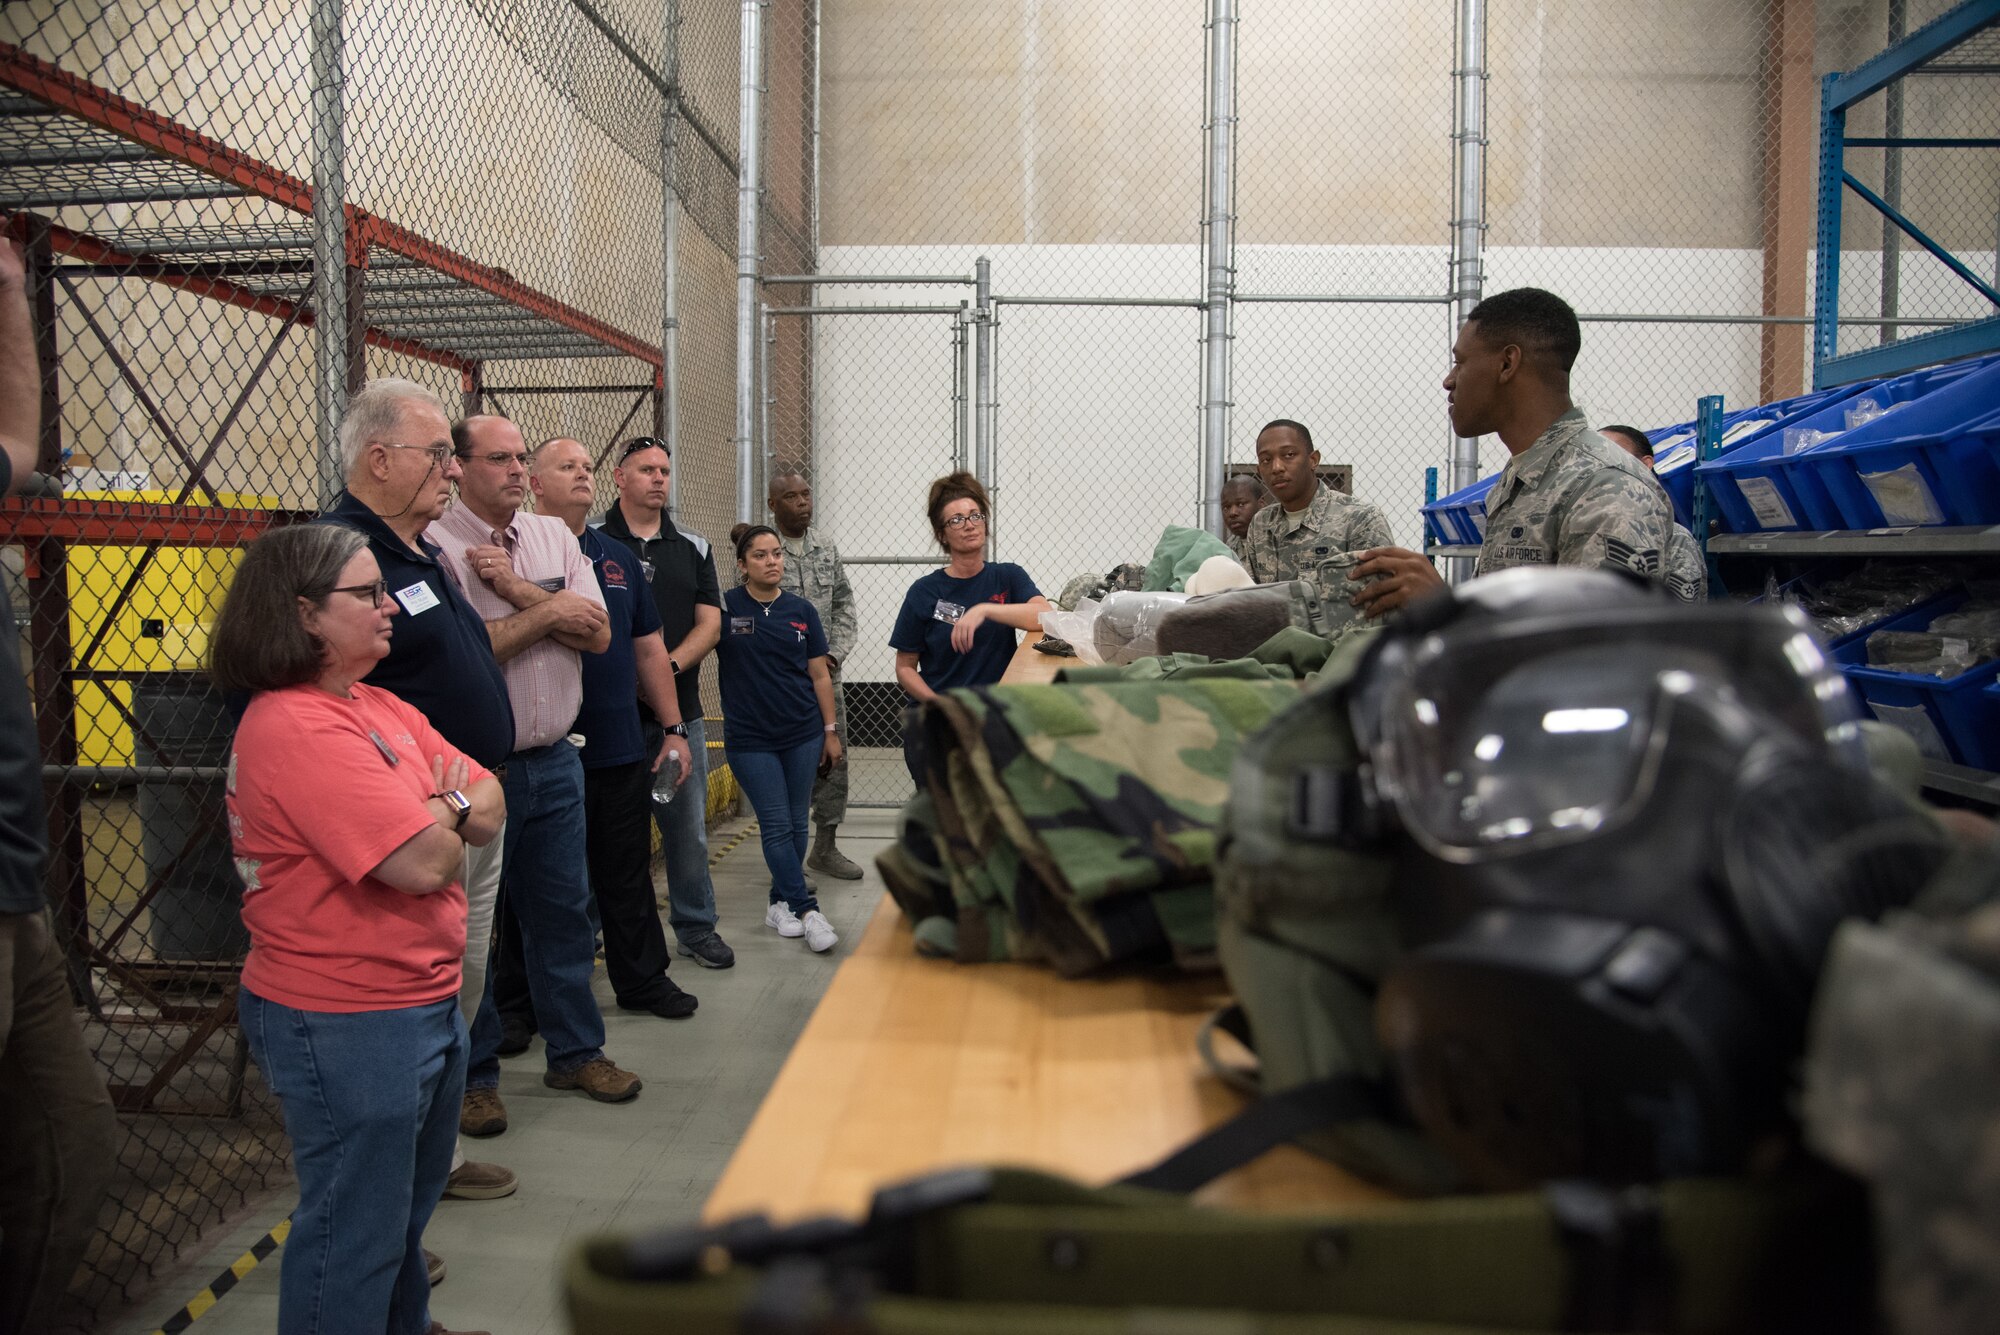 Civilian employers of 403rd Wing service members tour various shops within the 403rd Wing during Employer Appreciation Day at Keesler Air Force Base, Mississippi, June 2, 2018.  This gives employers the opportunity to see what the service member does on a unit training assembly for their Air Force Reserve career. (U.S. Air Force photo by Maj. Marnee A. C. Losurdo)